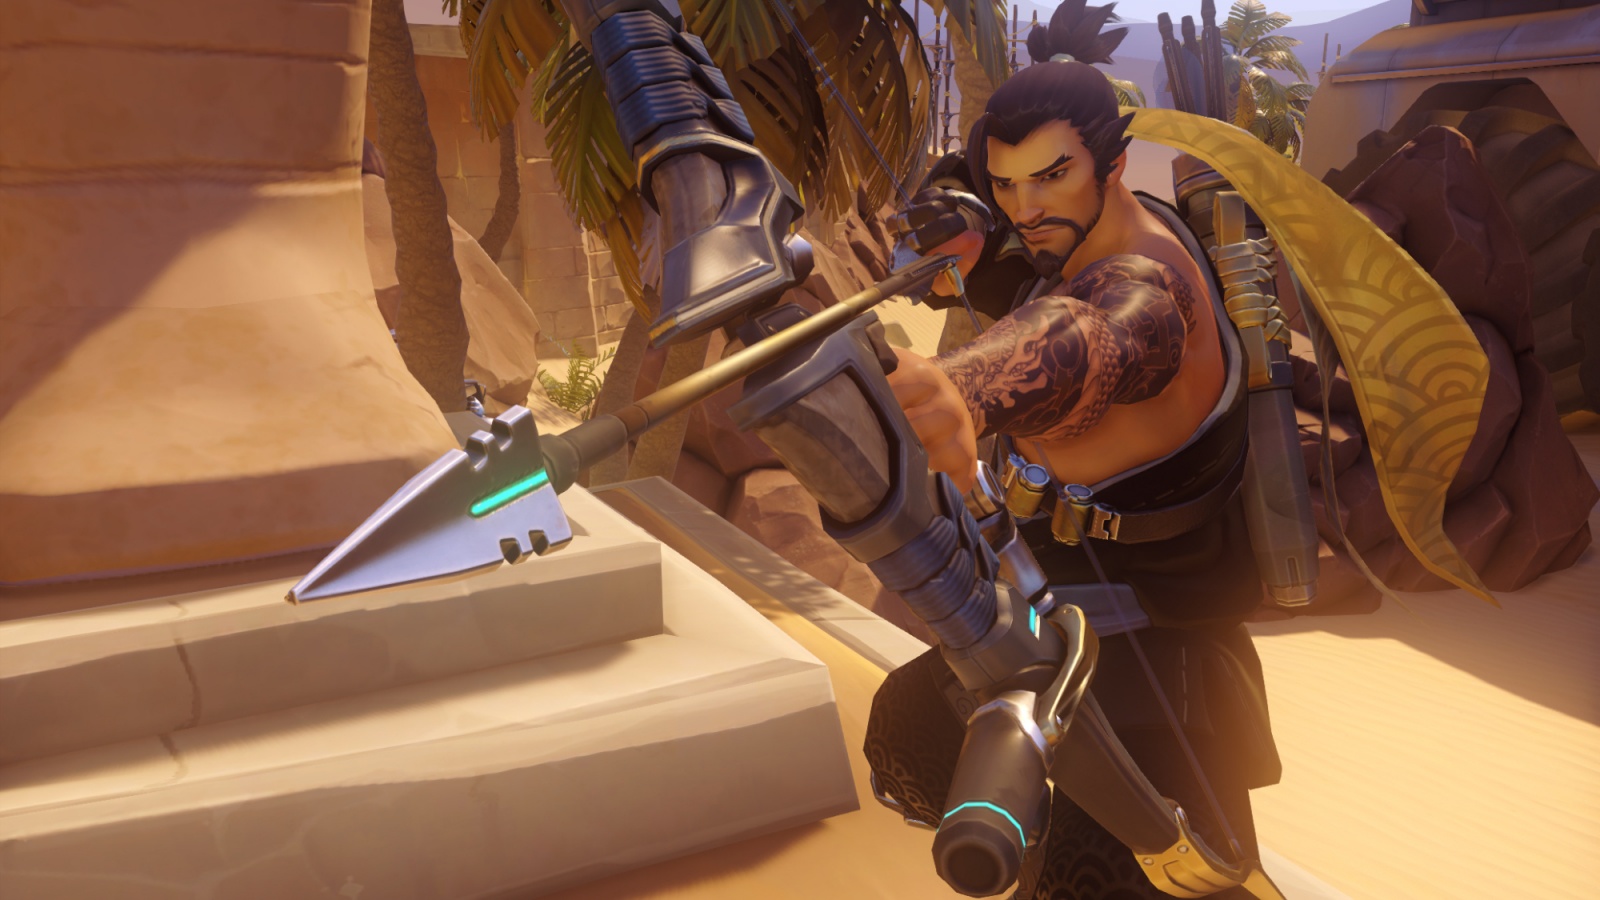 Overwatch 2 players argue Hanzo is “insufferable” due to headshot advantages – Dexerto